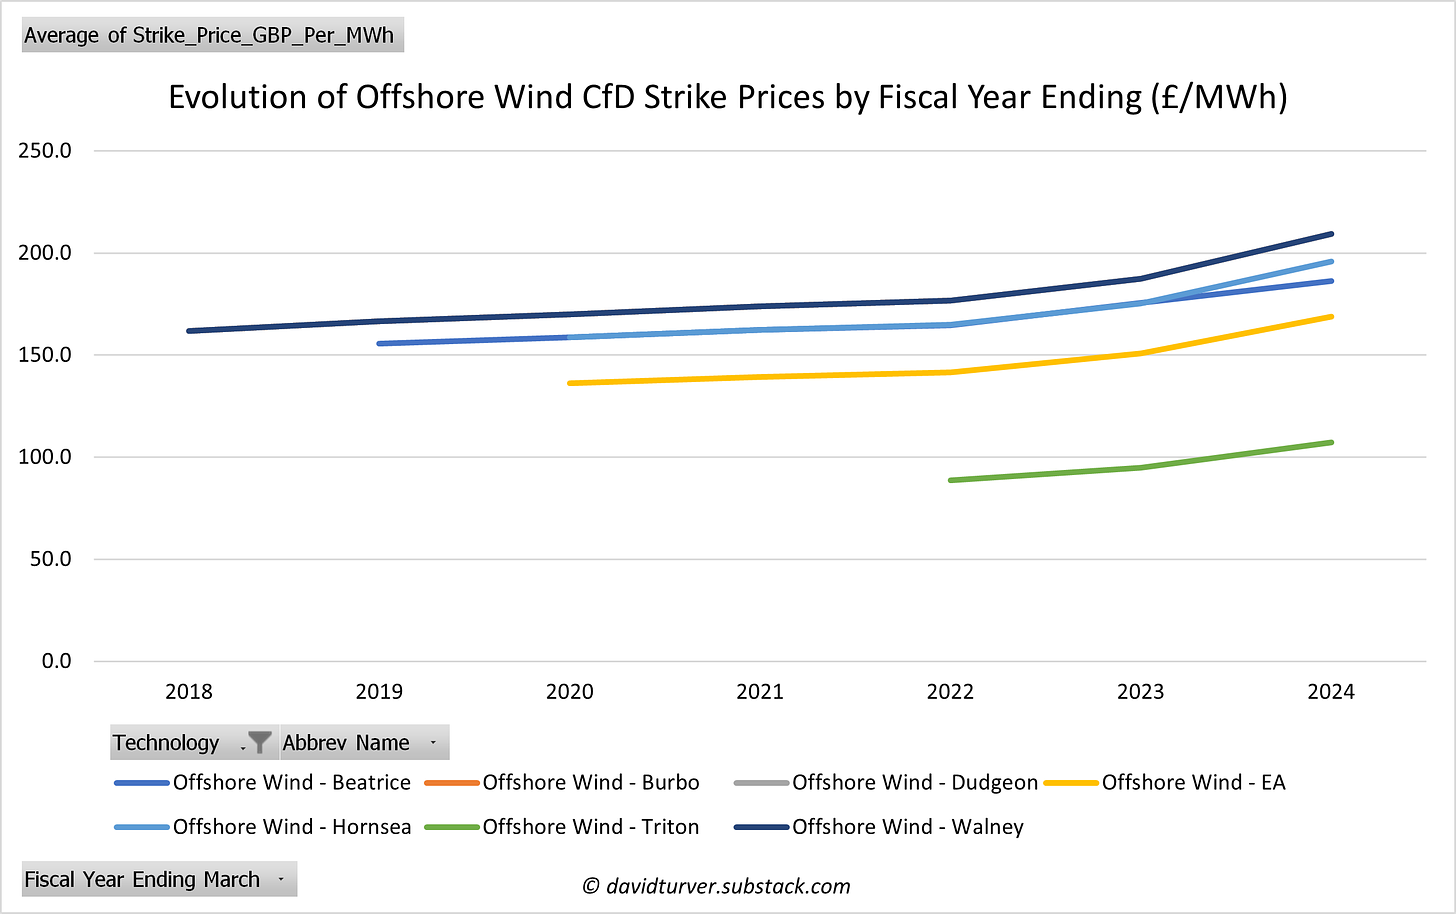 Figure 6 - Evolution of Offshore Wind Strike Prices by Fiscal Year Ending (£ per MWh)